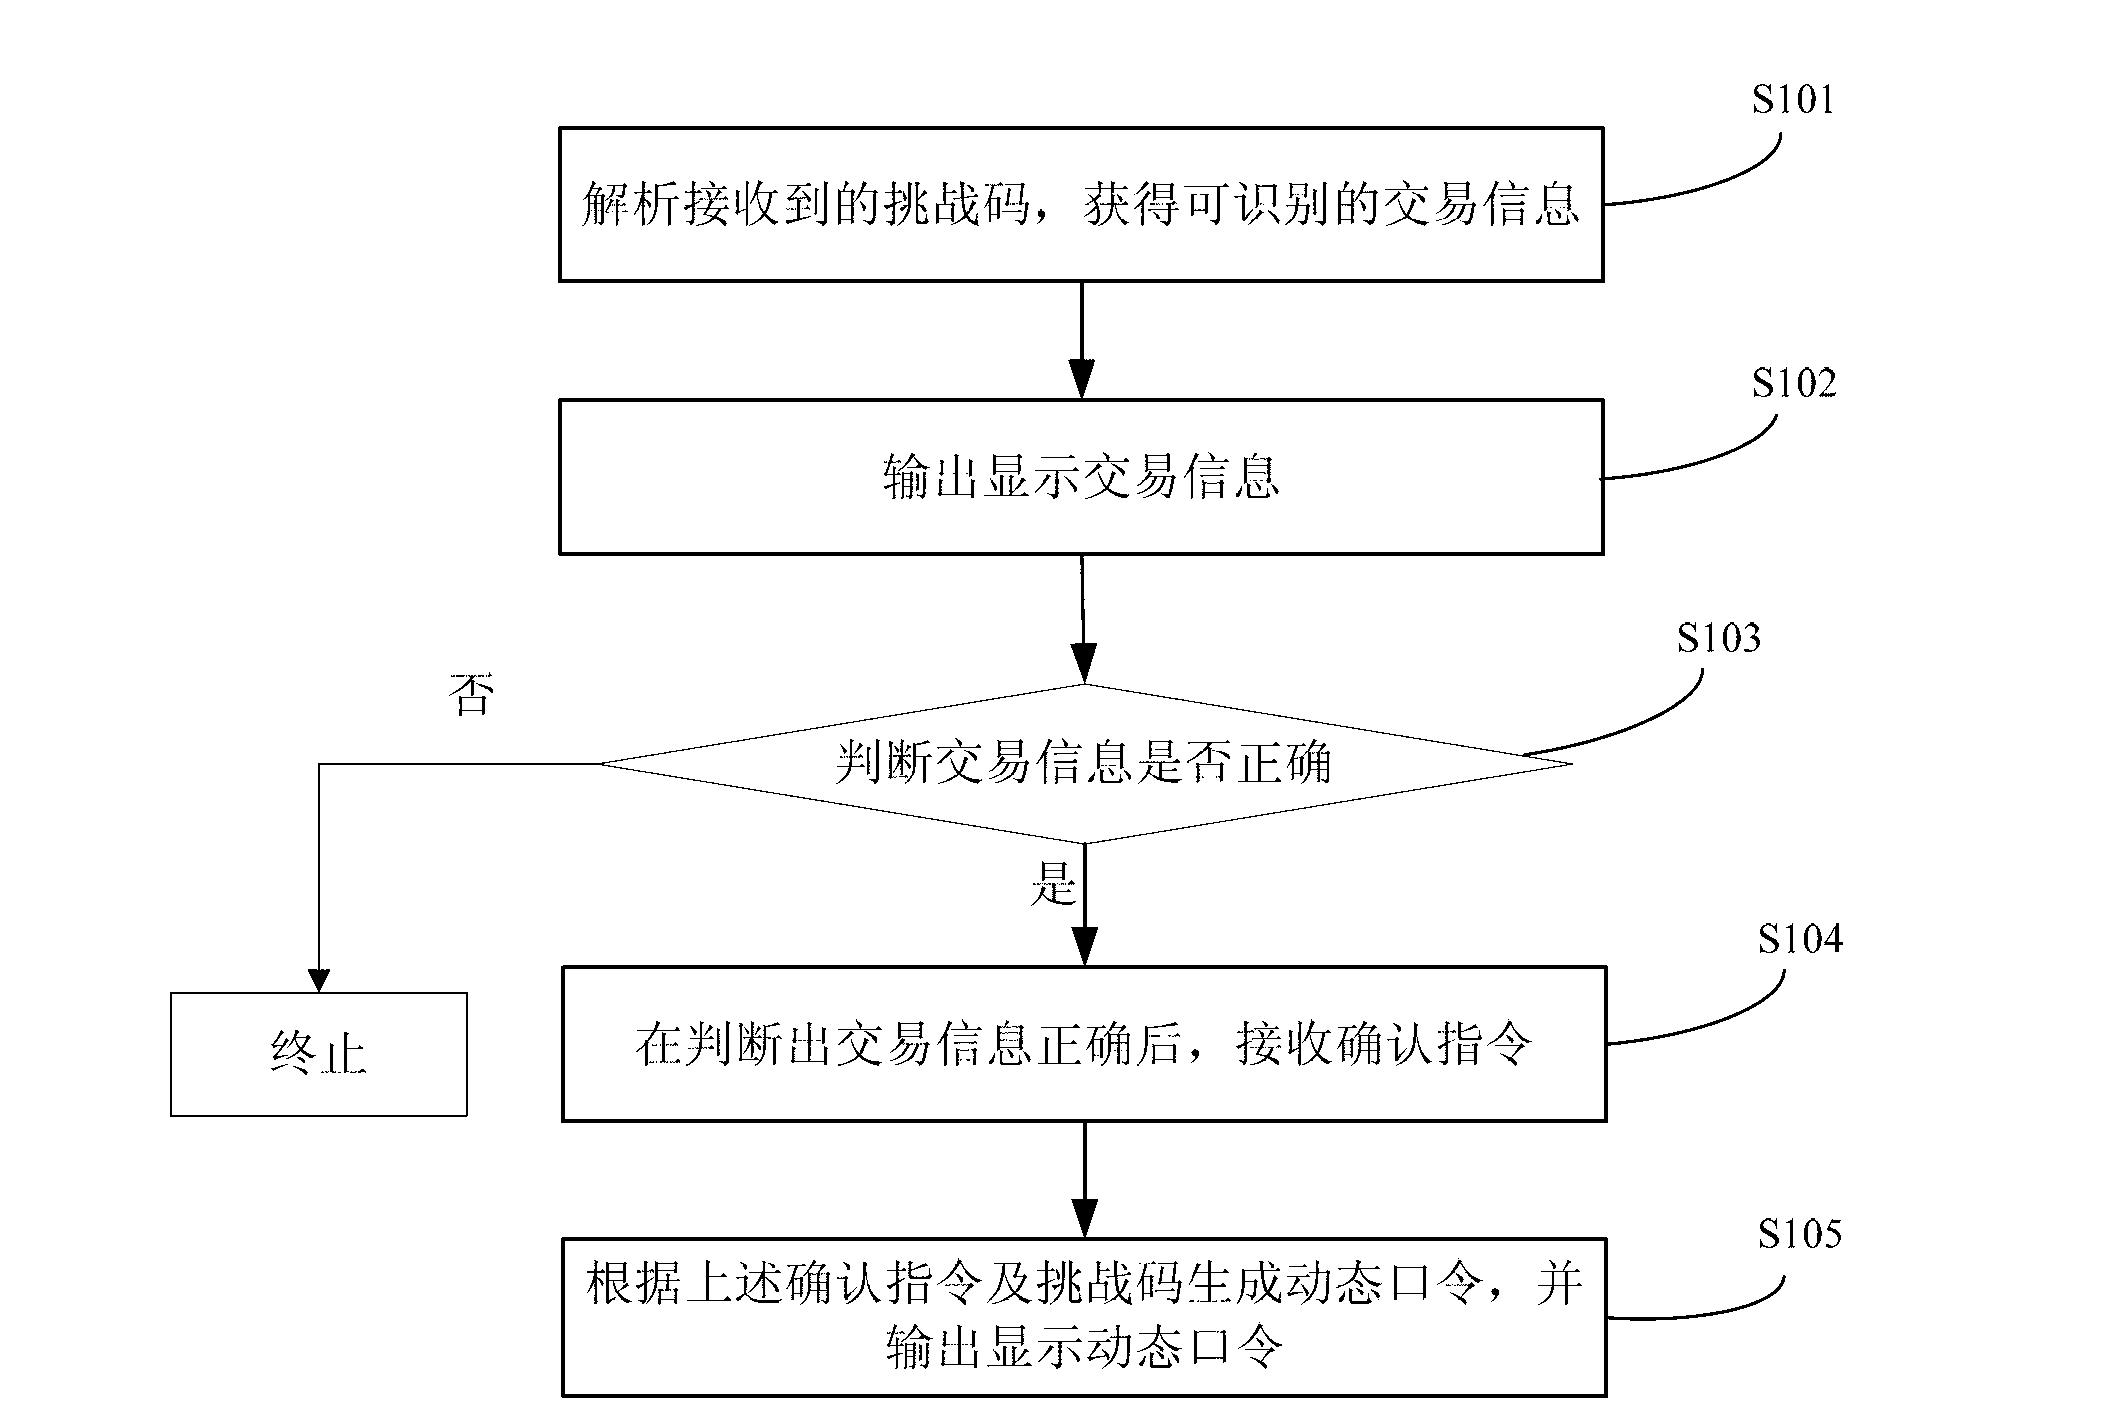 Dynamic password card and dynamic password generating method